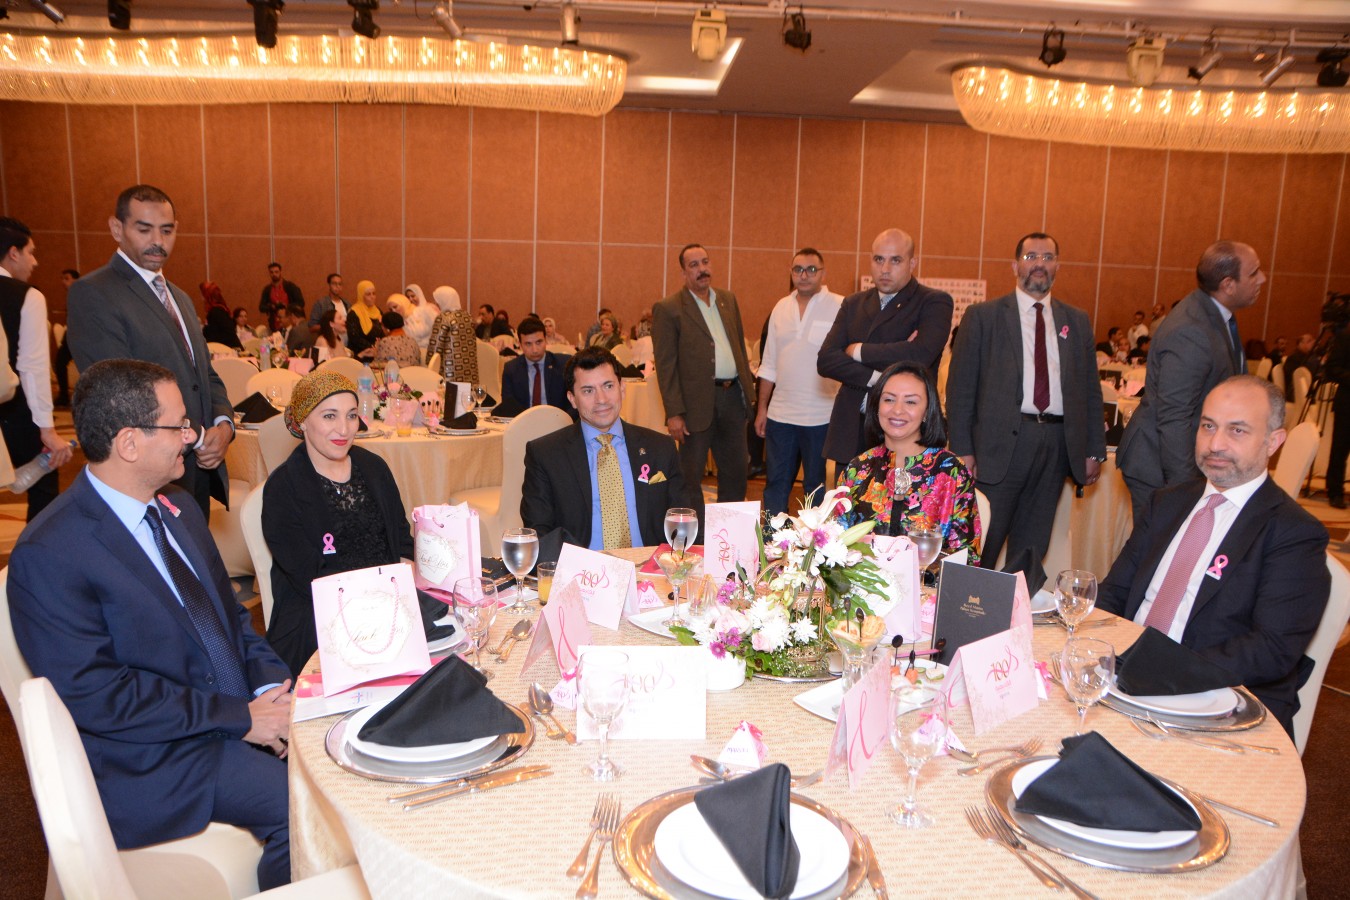 The Minister of Youth and Sports Attends Baheya’s Celebration of 100000 women